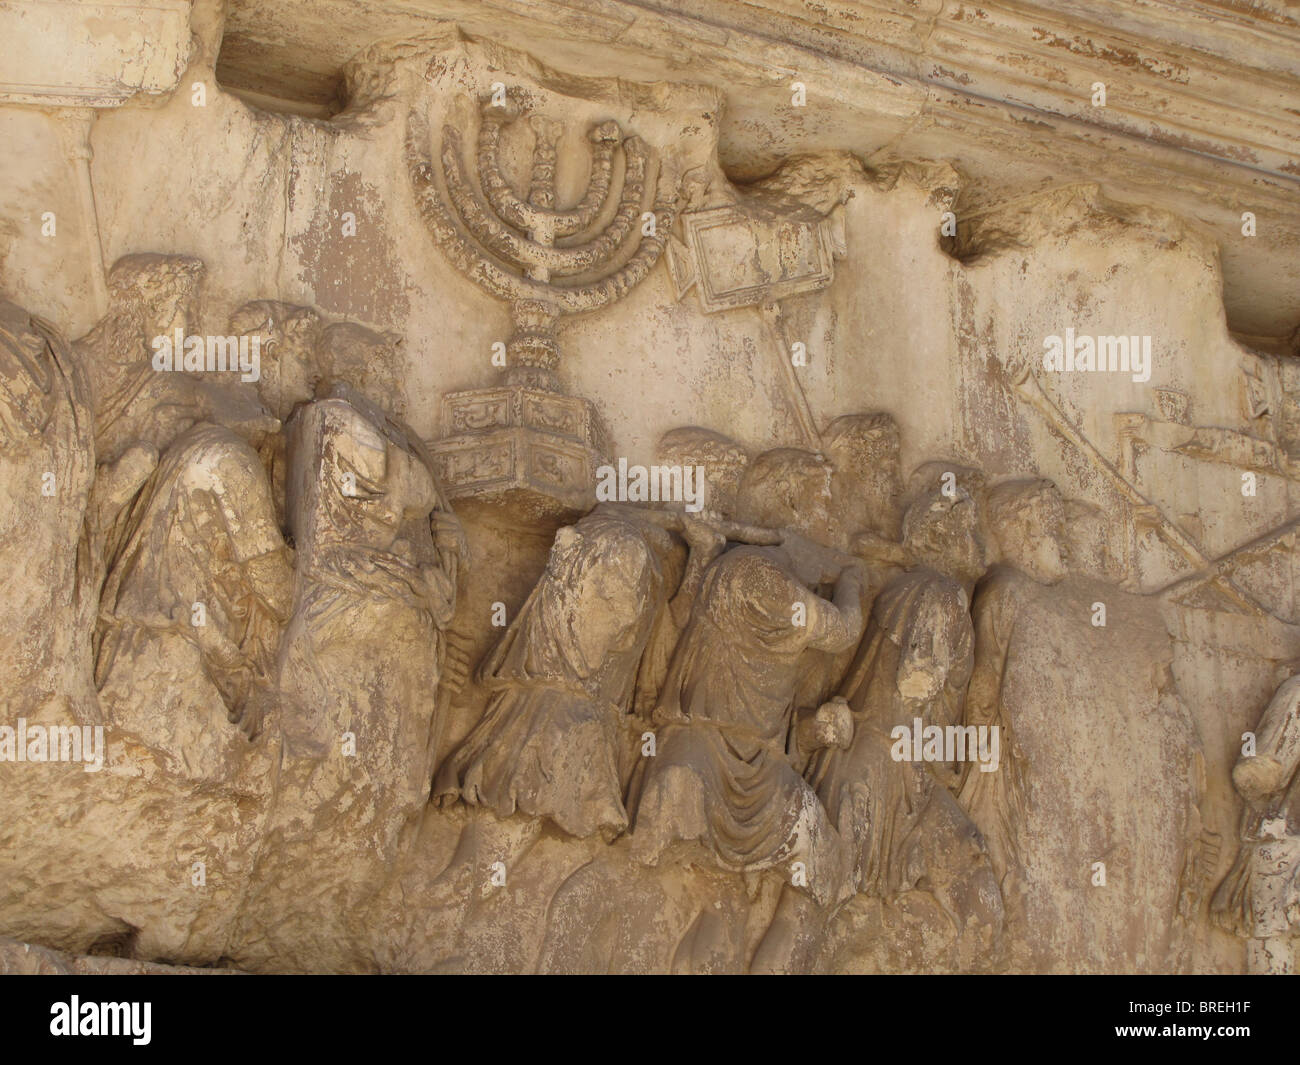 Italy, Rome, Arch of Titus, (Titus gate or Arcus Titi) – the conquering of Jerusalem. Stock Photo